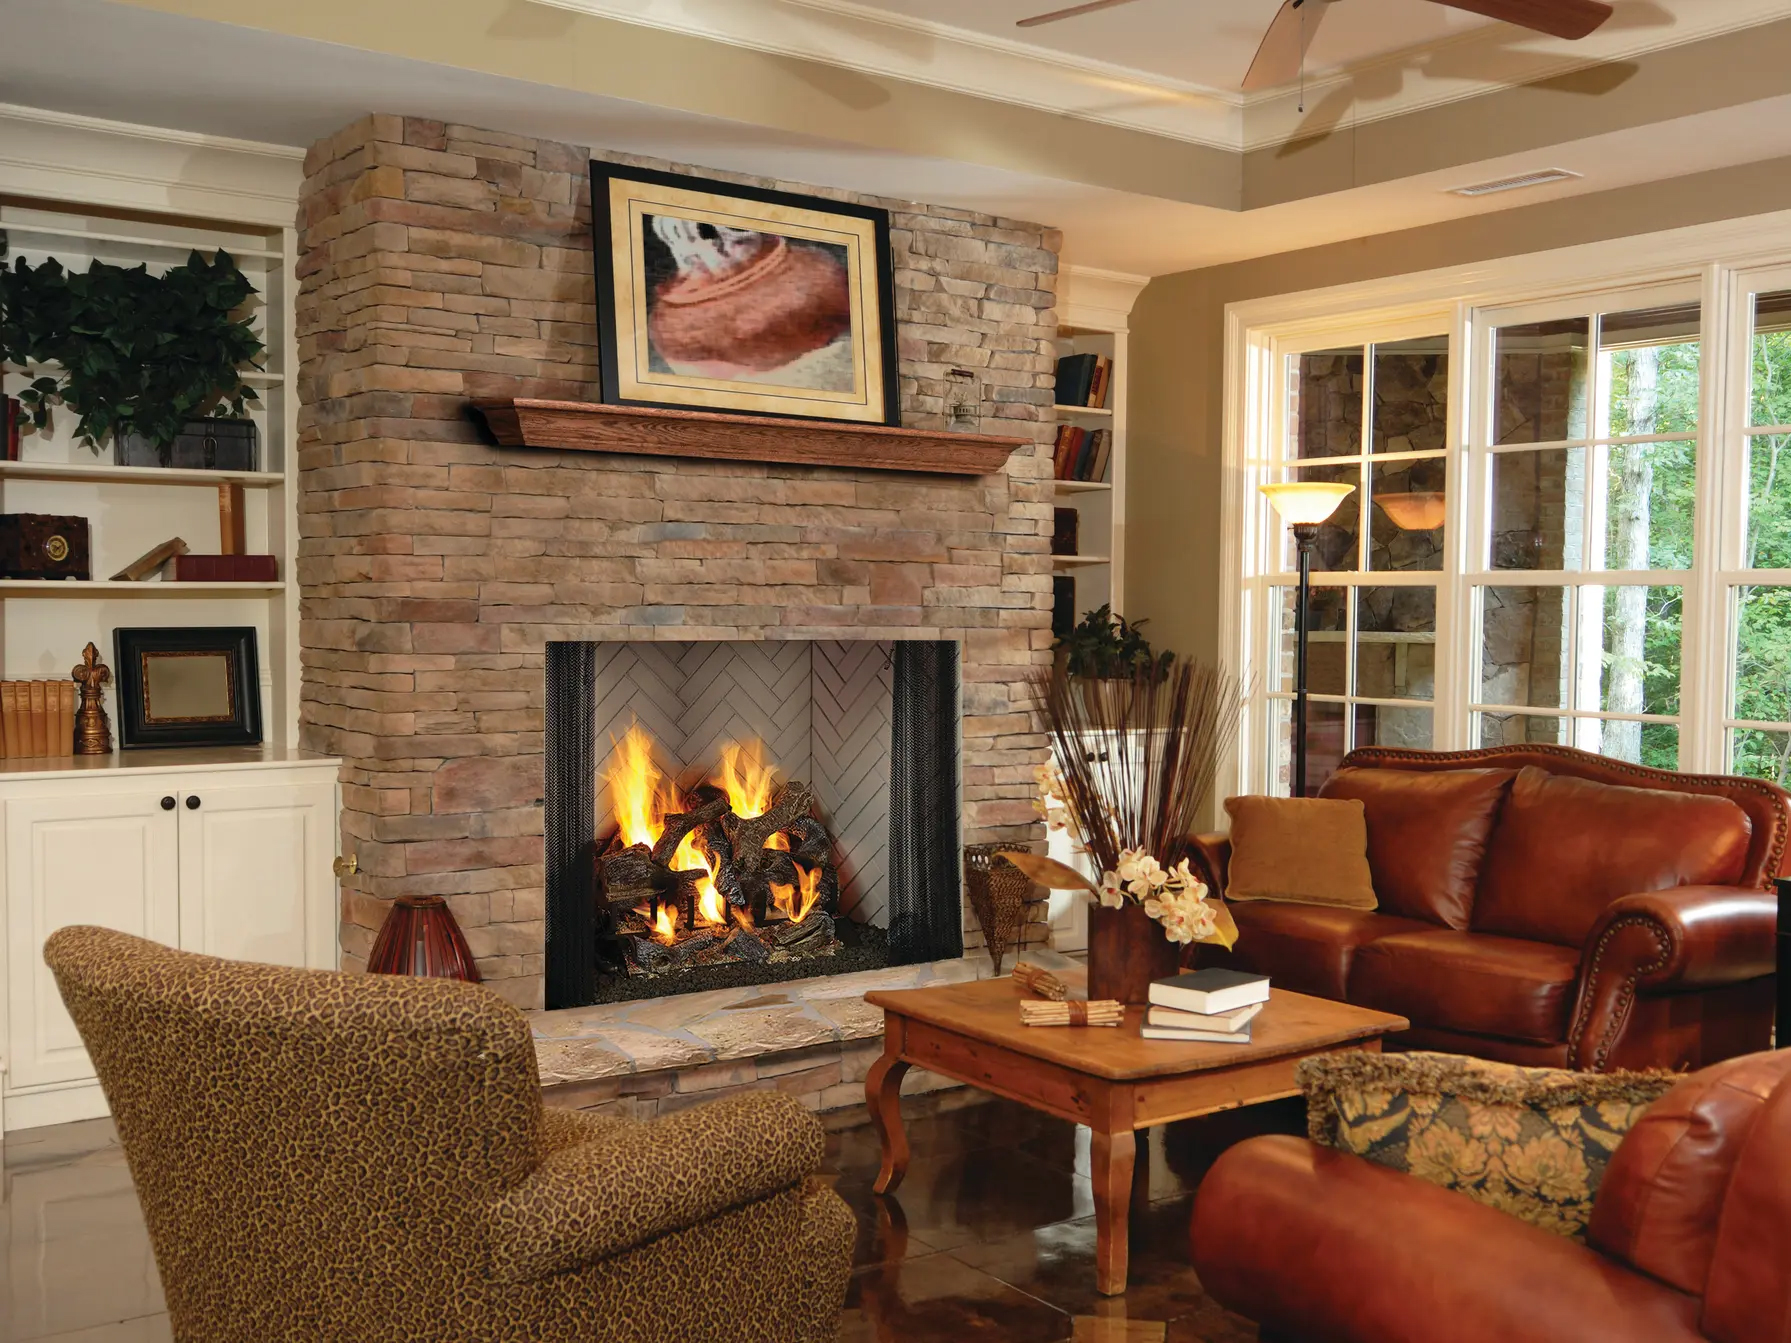 A cozy living room with a stone fireplace, leather furniture, and large windows letting in natural light.